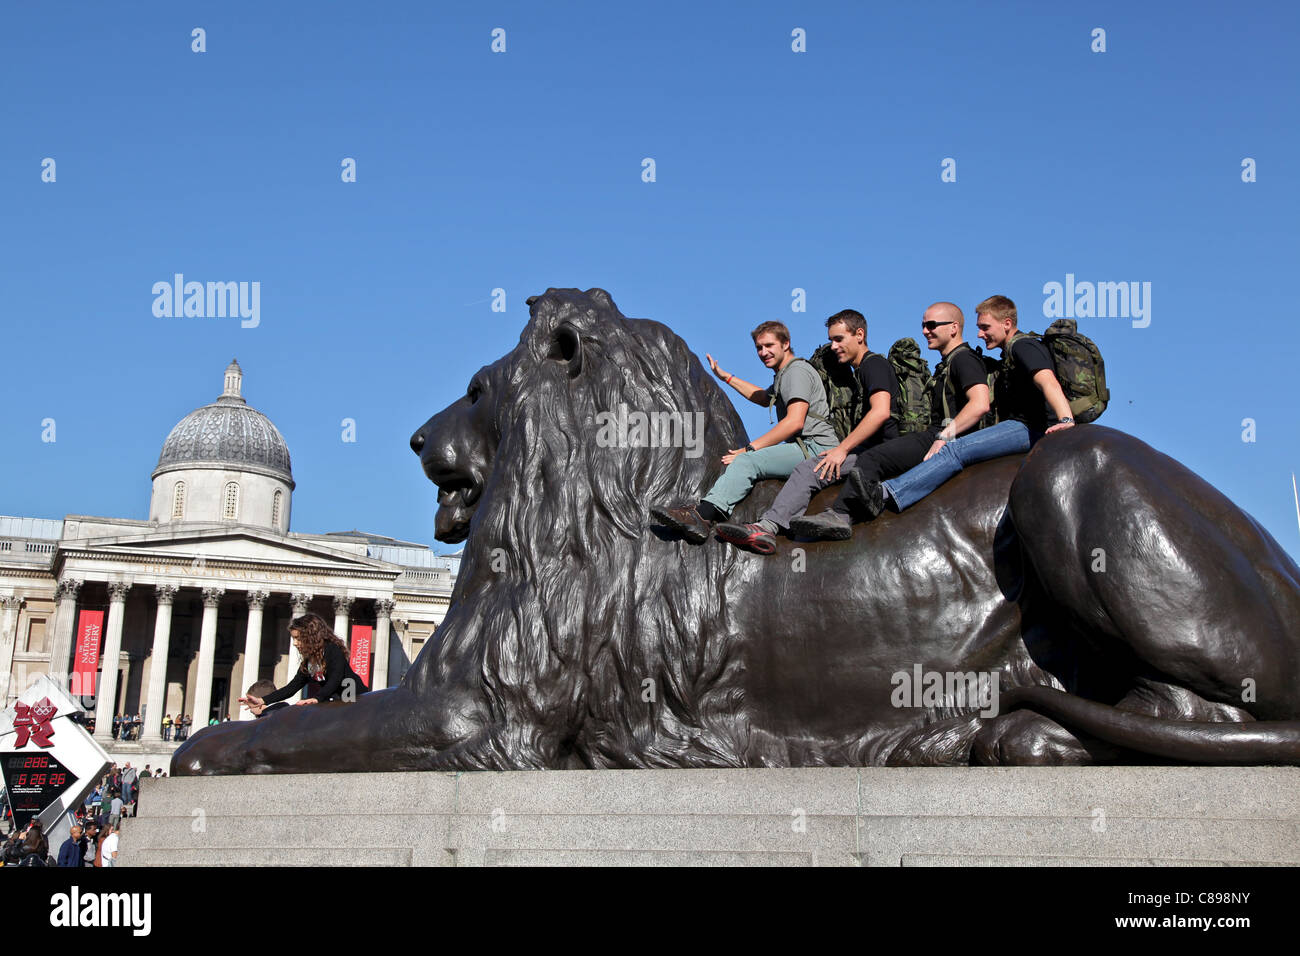 Tourists 'riding' one of the lions at the base of the Nelson's Column monument Stock Photo